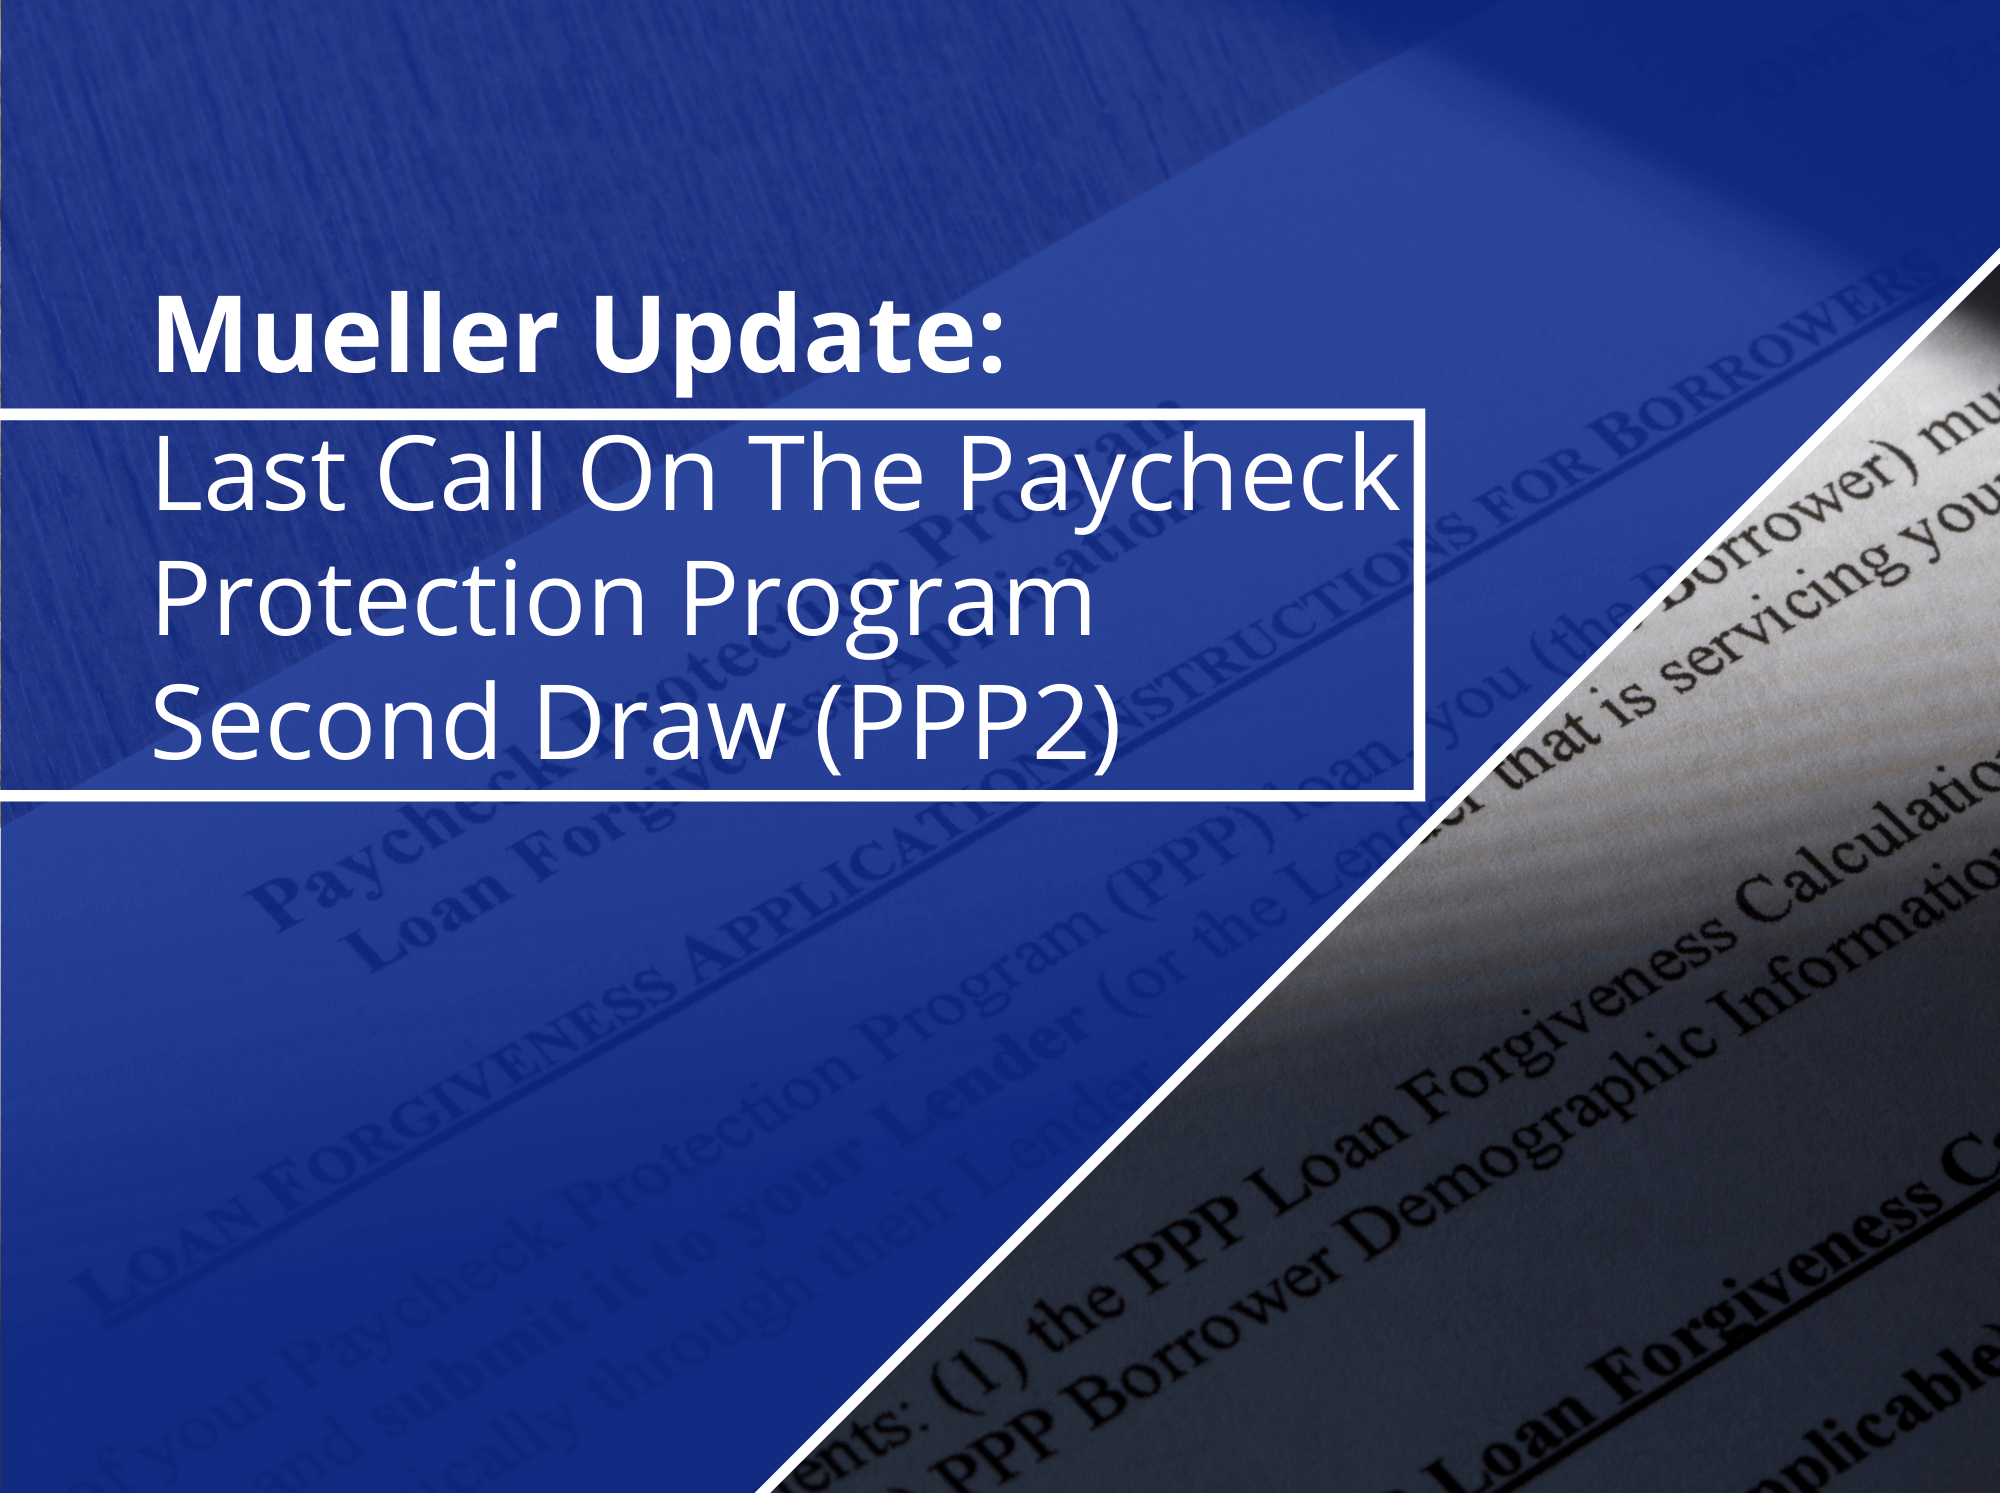 Last Call on the Paycheck Protection Program Second Draw